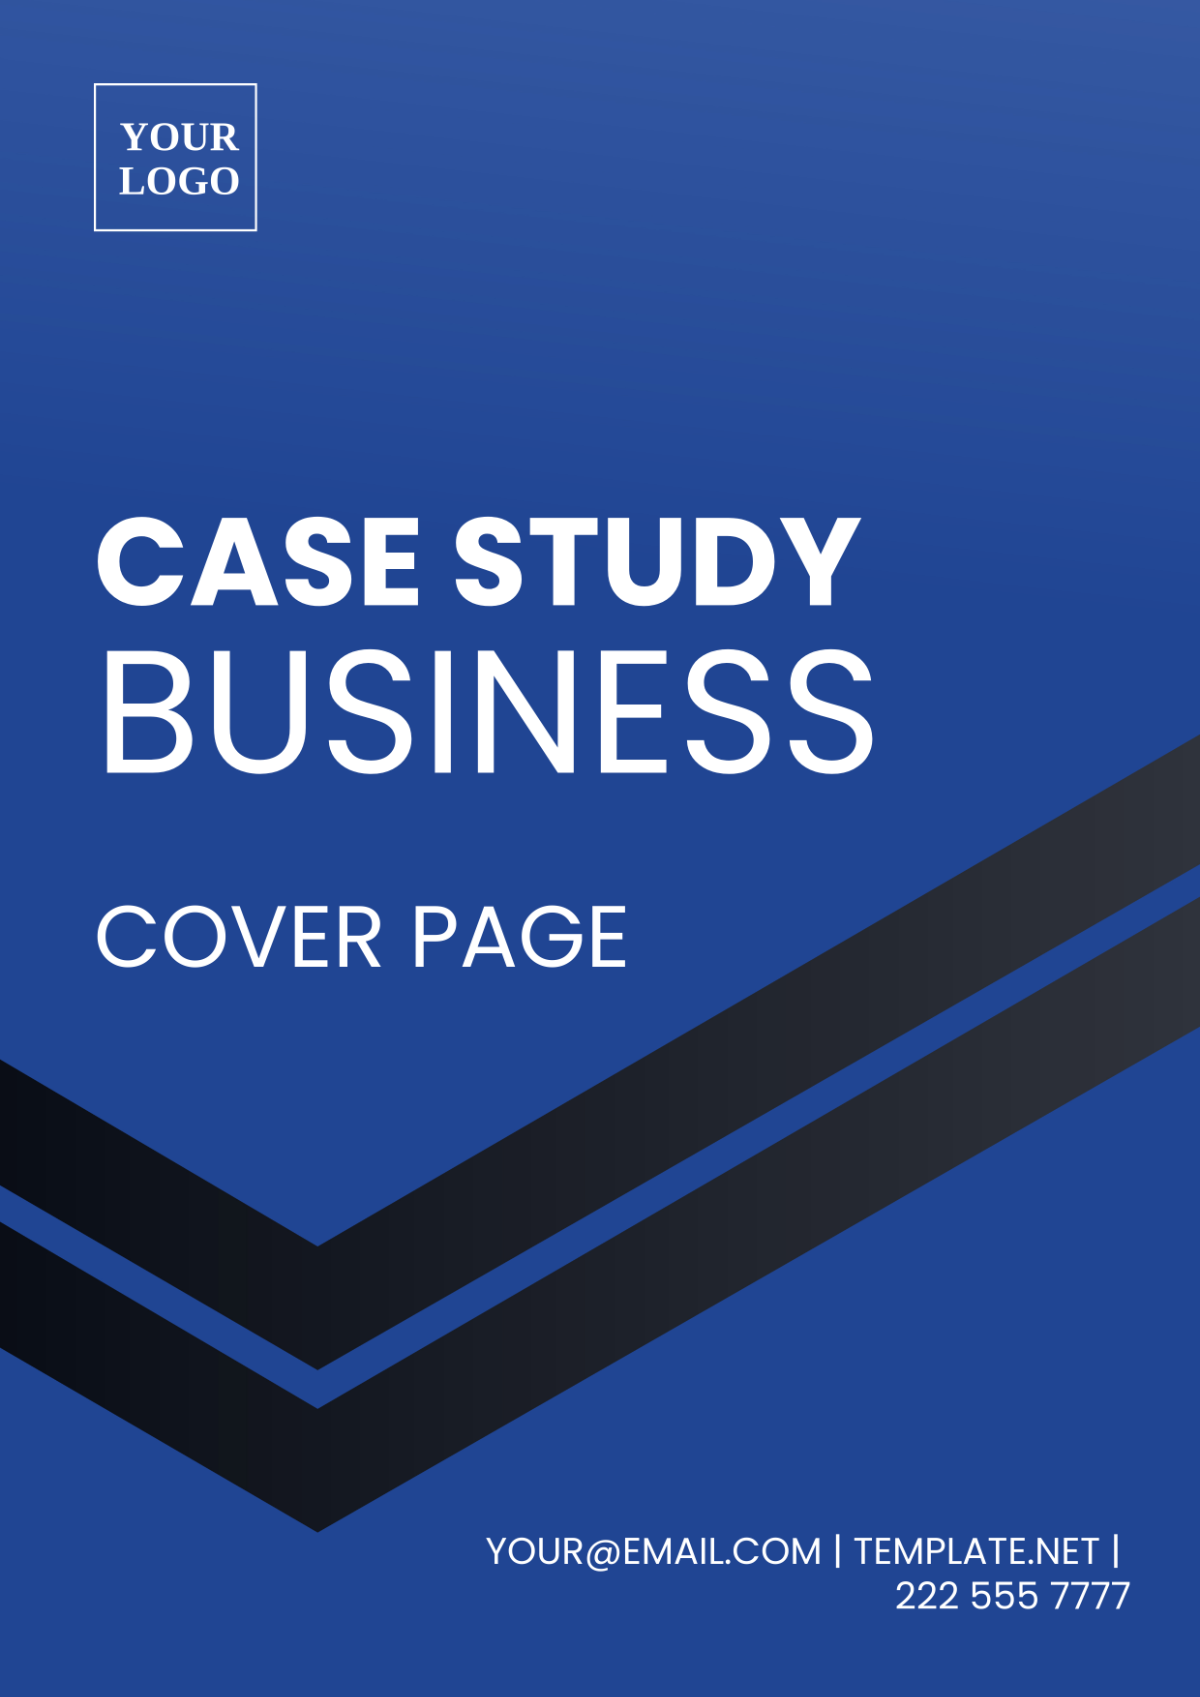 Case Study Business Cover Page